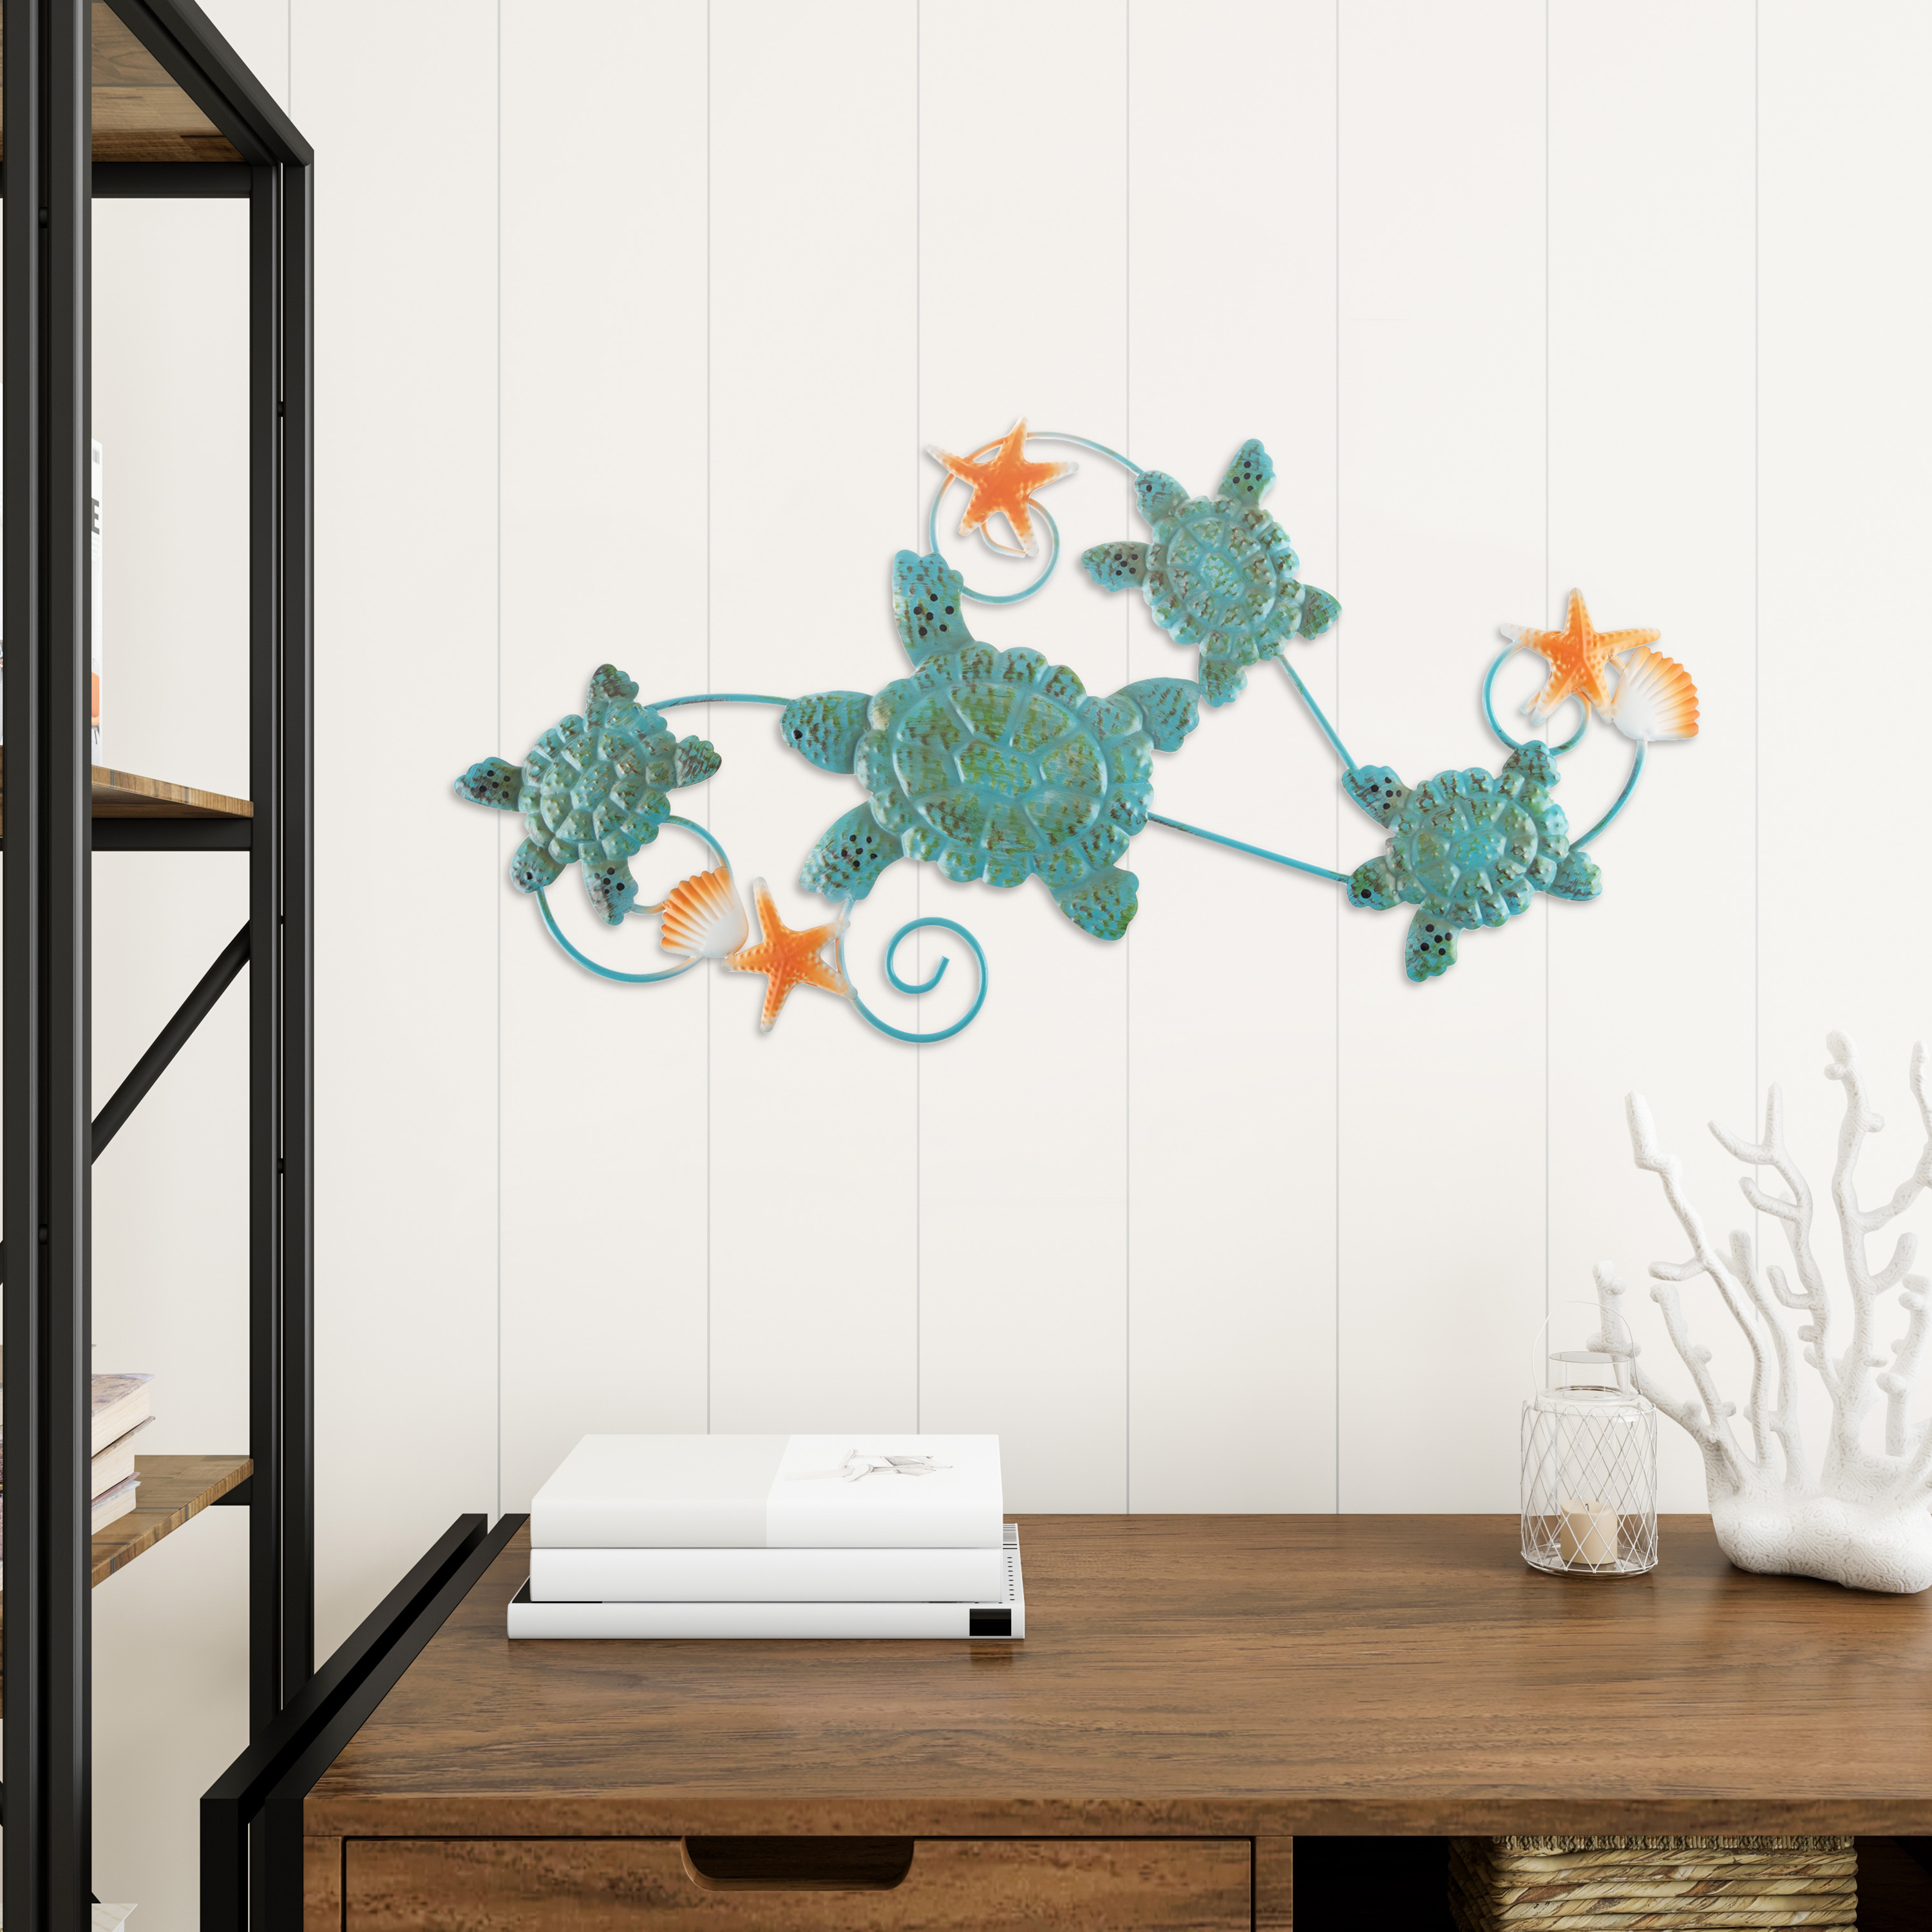 Sea Turtles Wall Art With Shells And Starfish- Nautical 3D Metal Hanging Décor-Vintage Coastal Under Water Sea Life Ocean Home Artwork